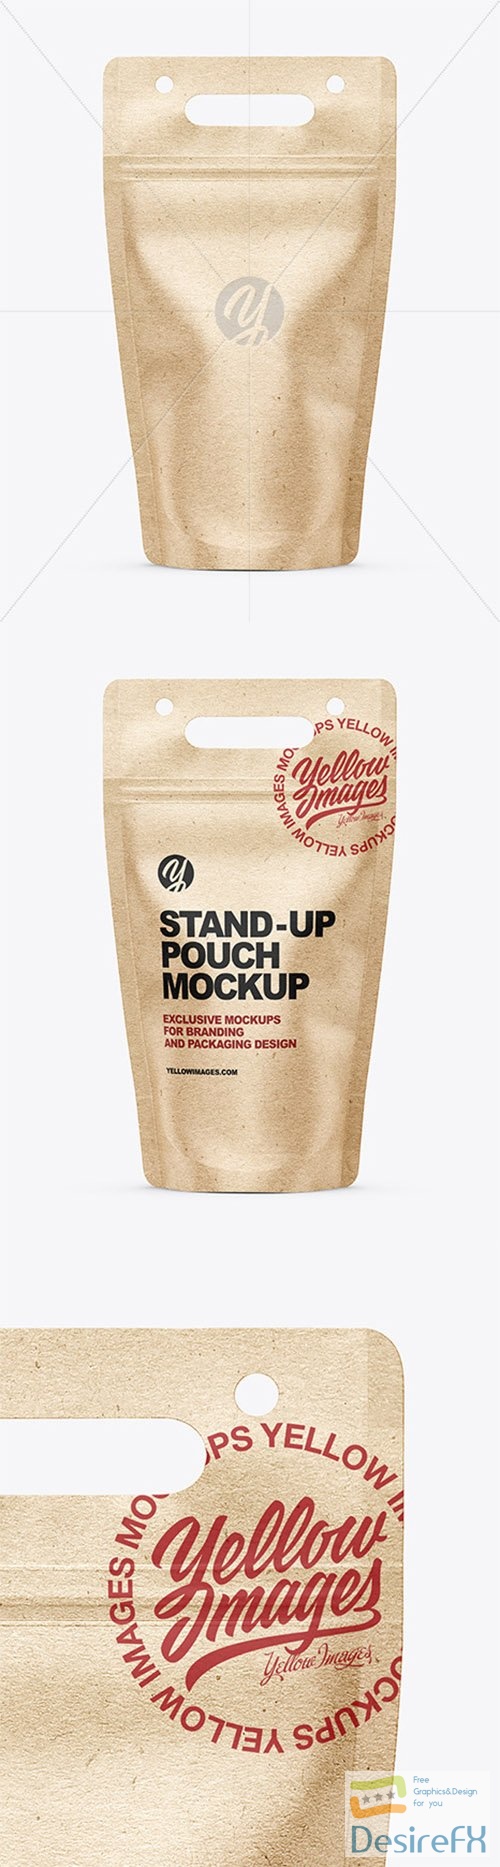 Kraft Stand-up Pouch Mockup 79429 TIF